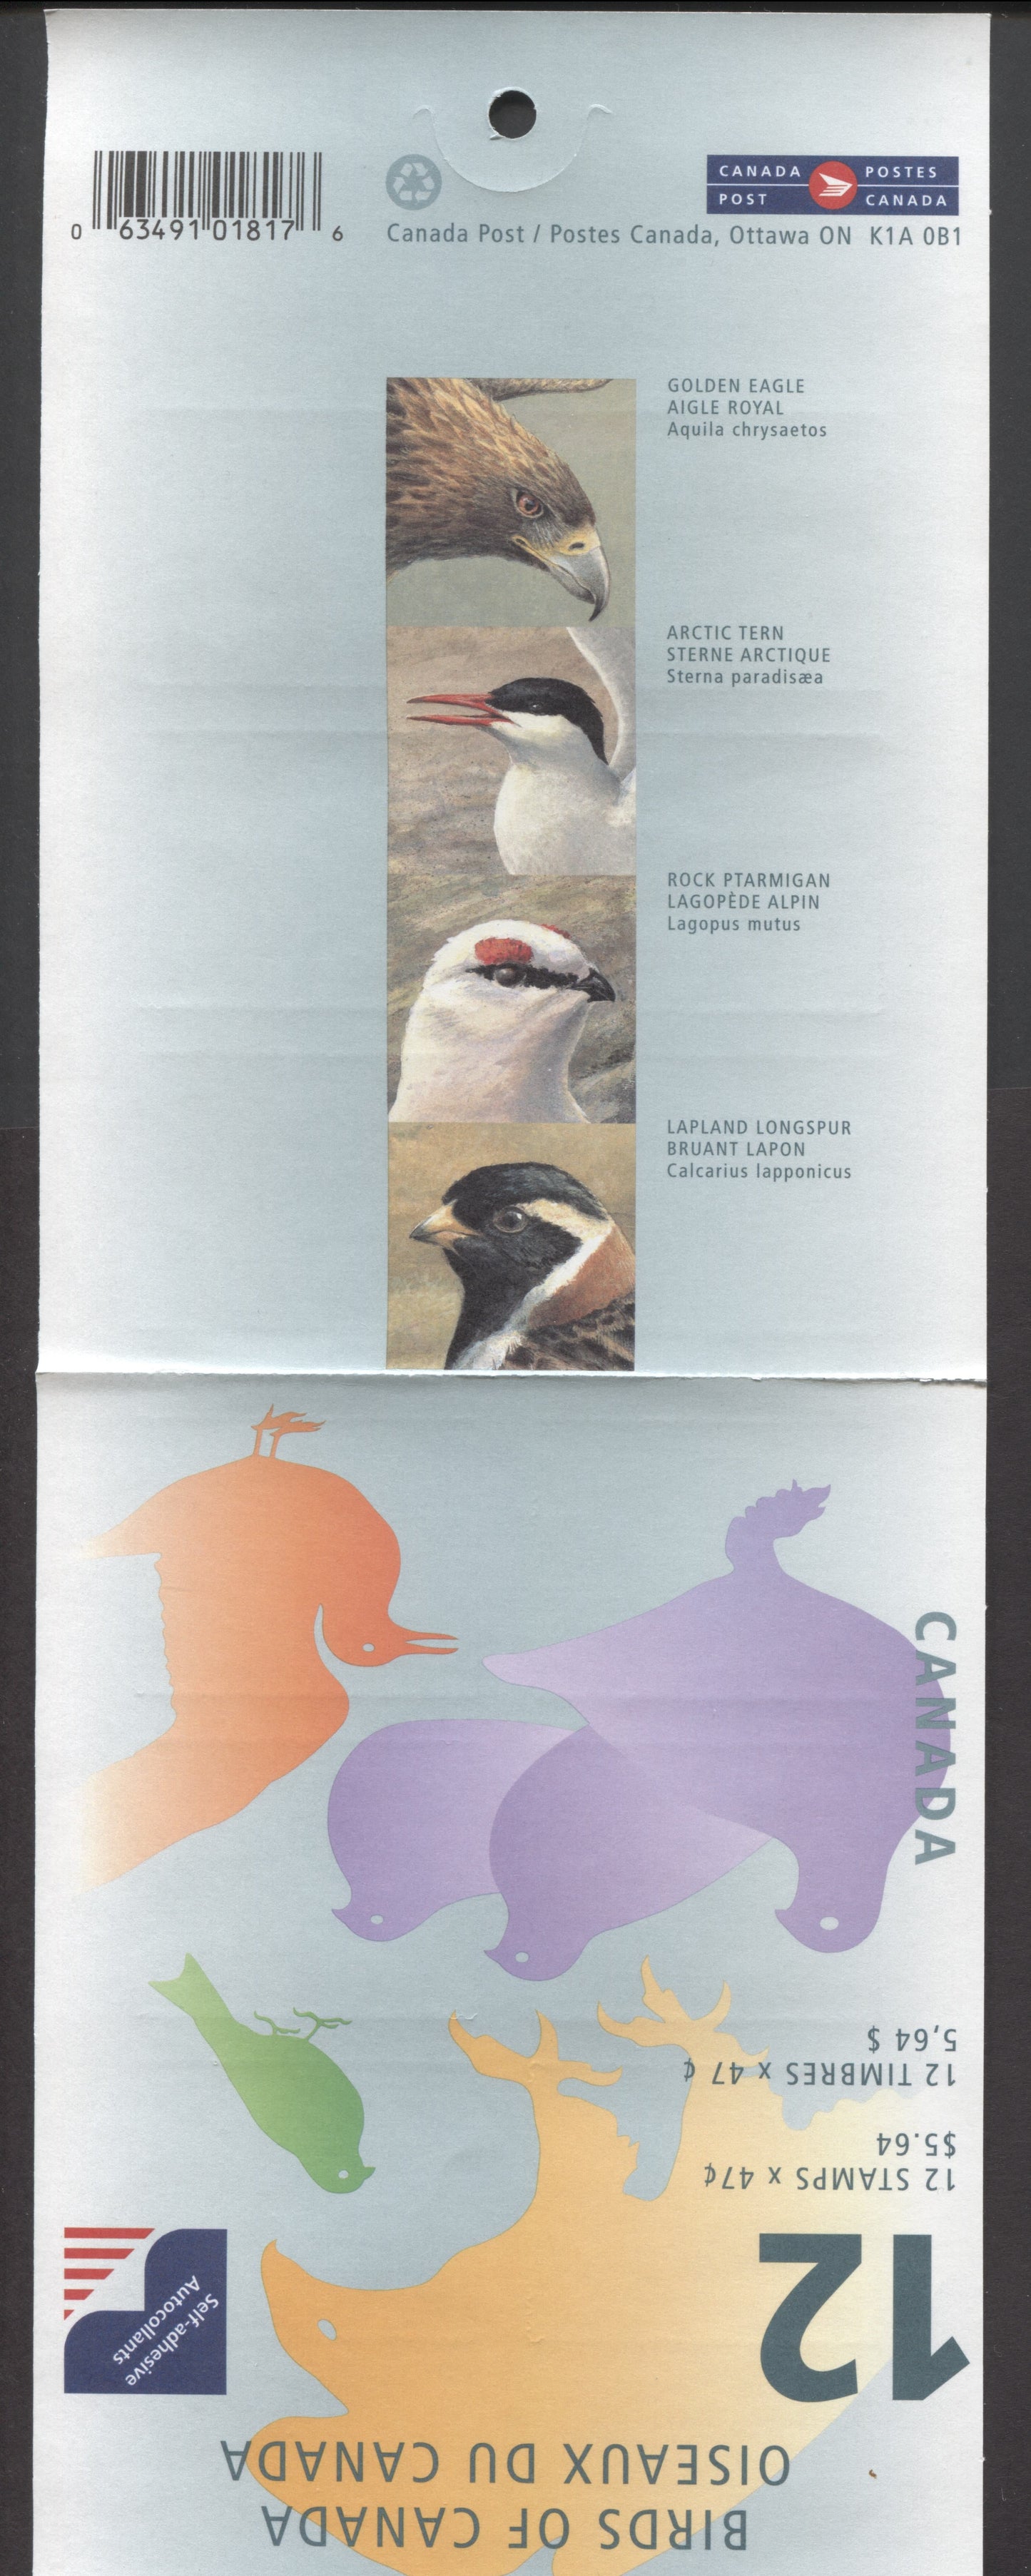 Canada #BK241a-b 2001 Birds of Canada Issue, Complete $5.64 Booklet, JAC Paper, Dead Paper, 4 mm GT-4 Tagging